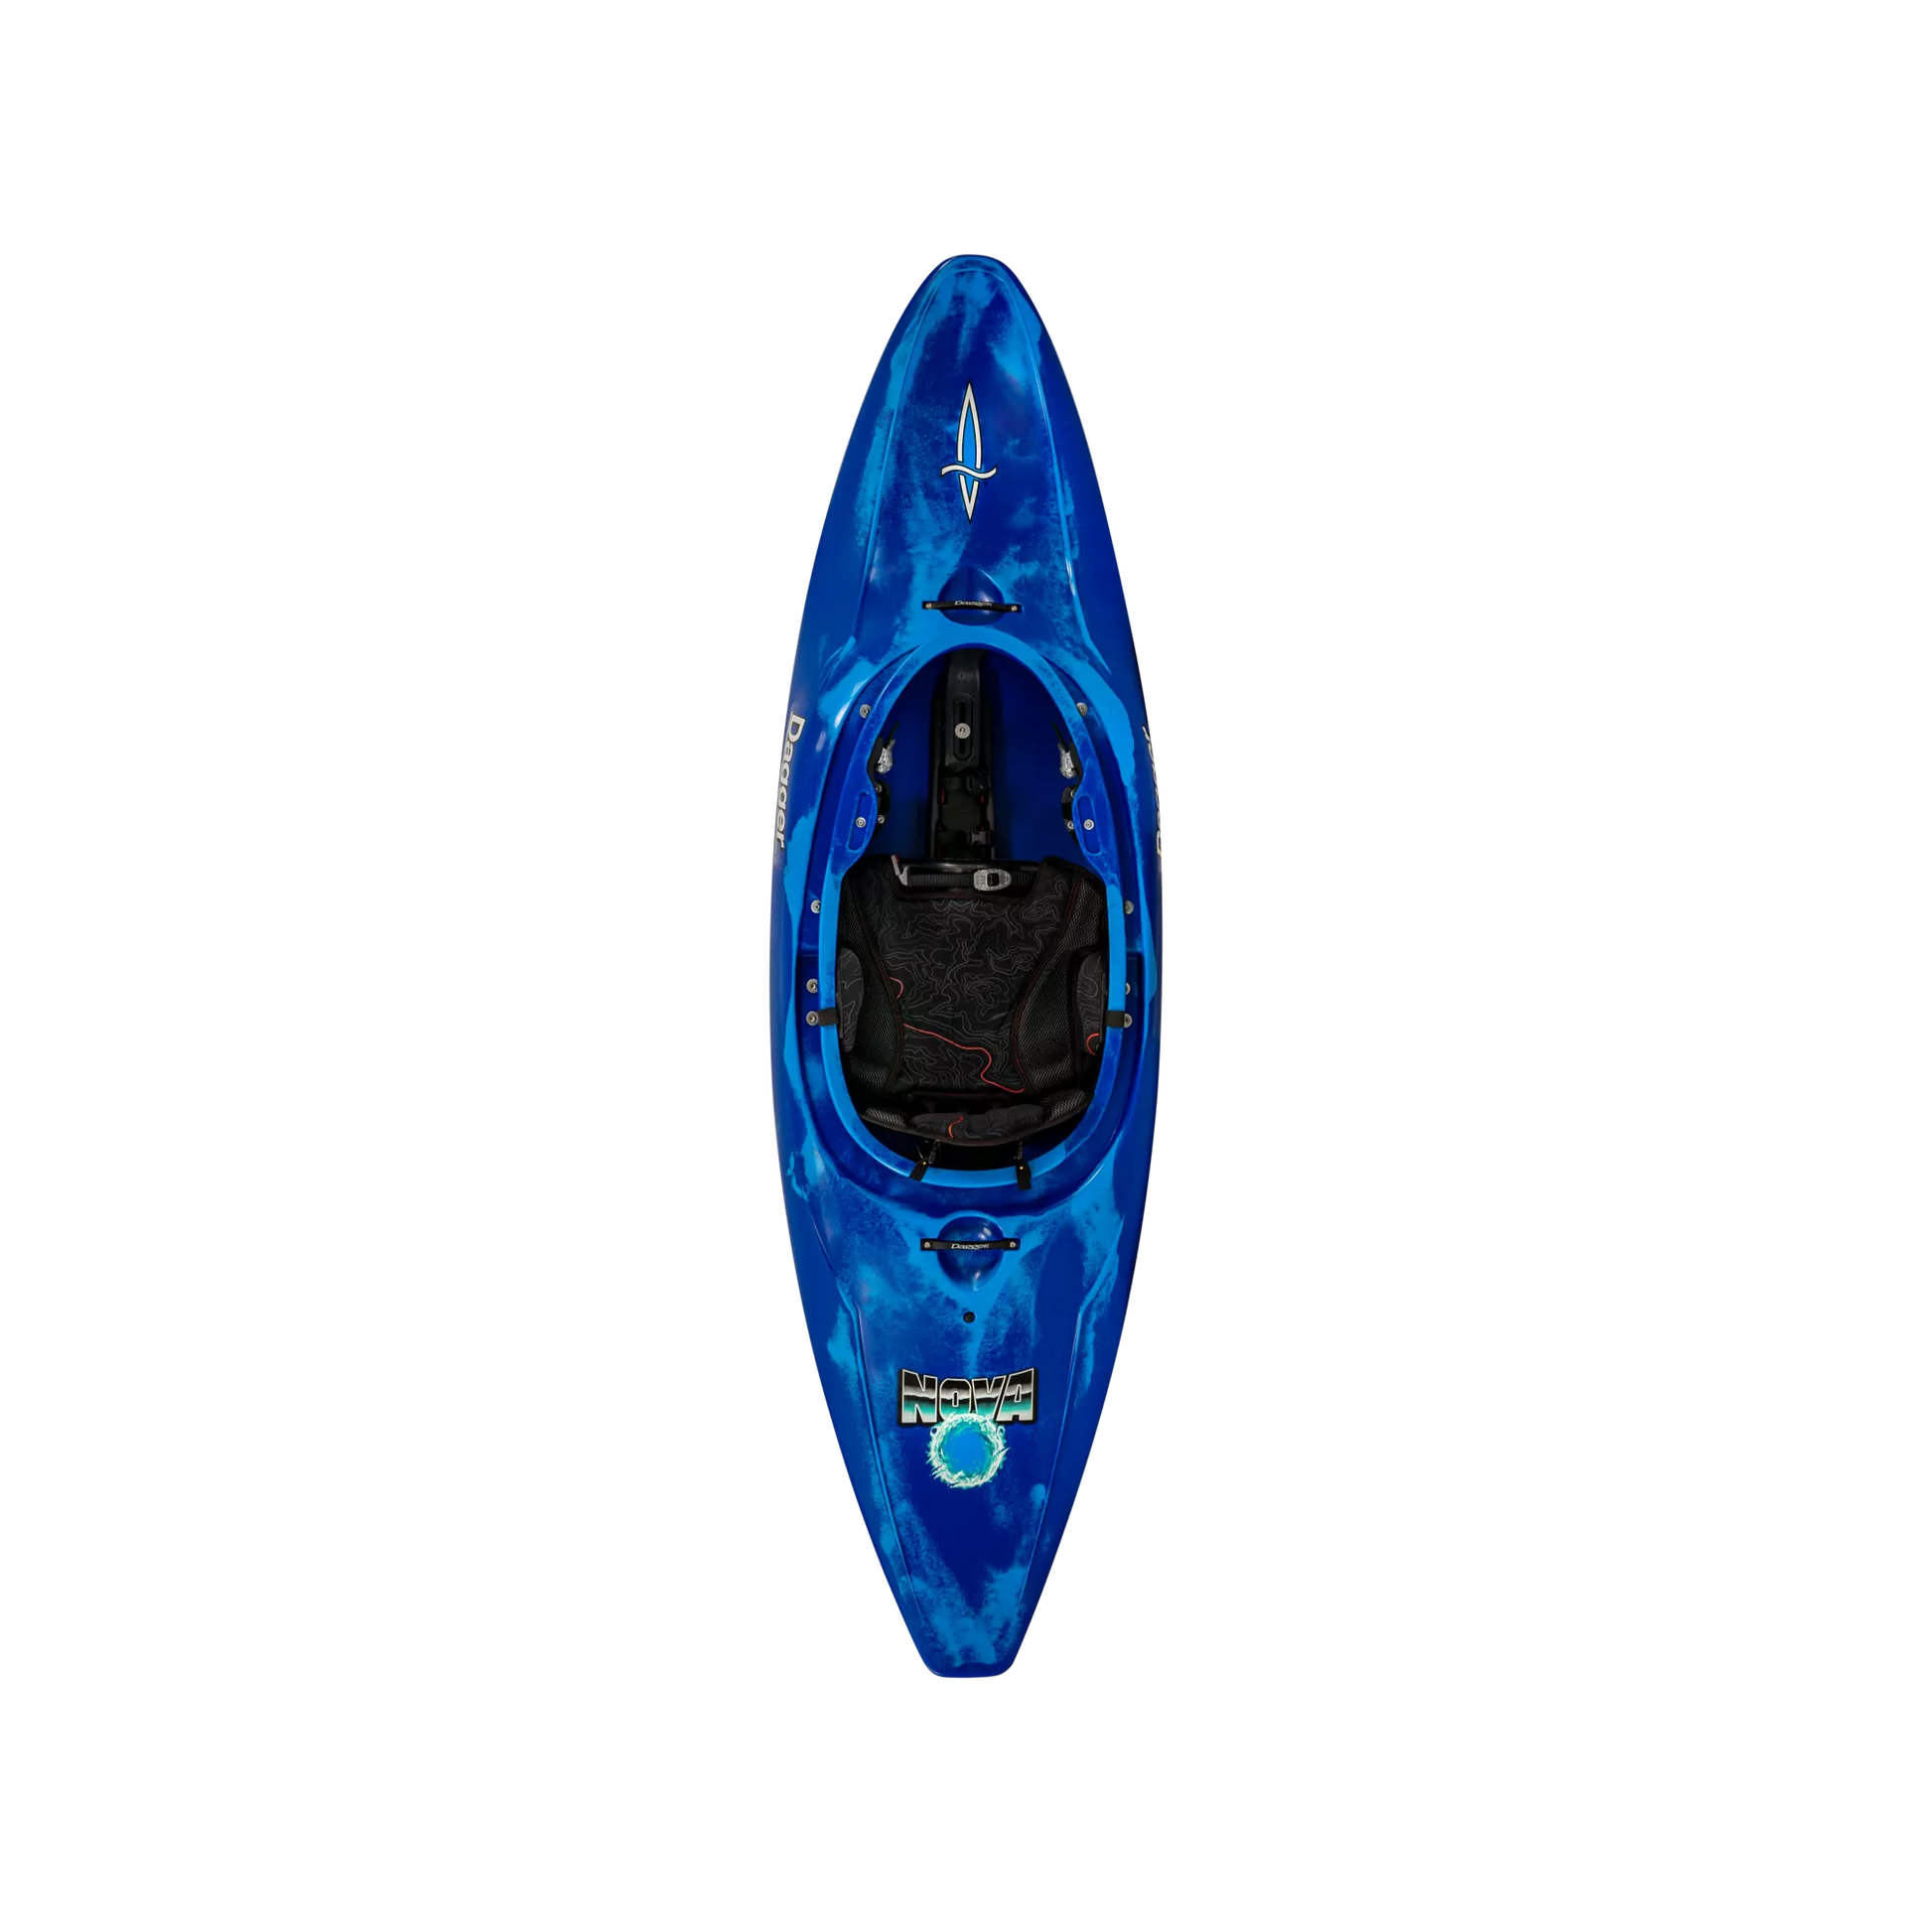 Blue Smoke full slice river play whitewater kayak.The Dagger Nova and Supernova are uniquely designed for 2 different paddler size ranges so you can saddle up, slice, surf, and spin your way to hours of amusement. 